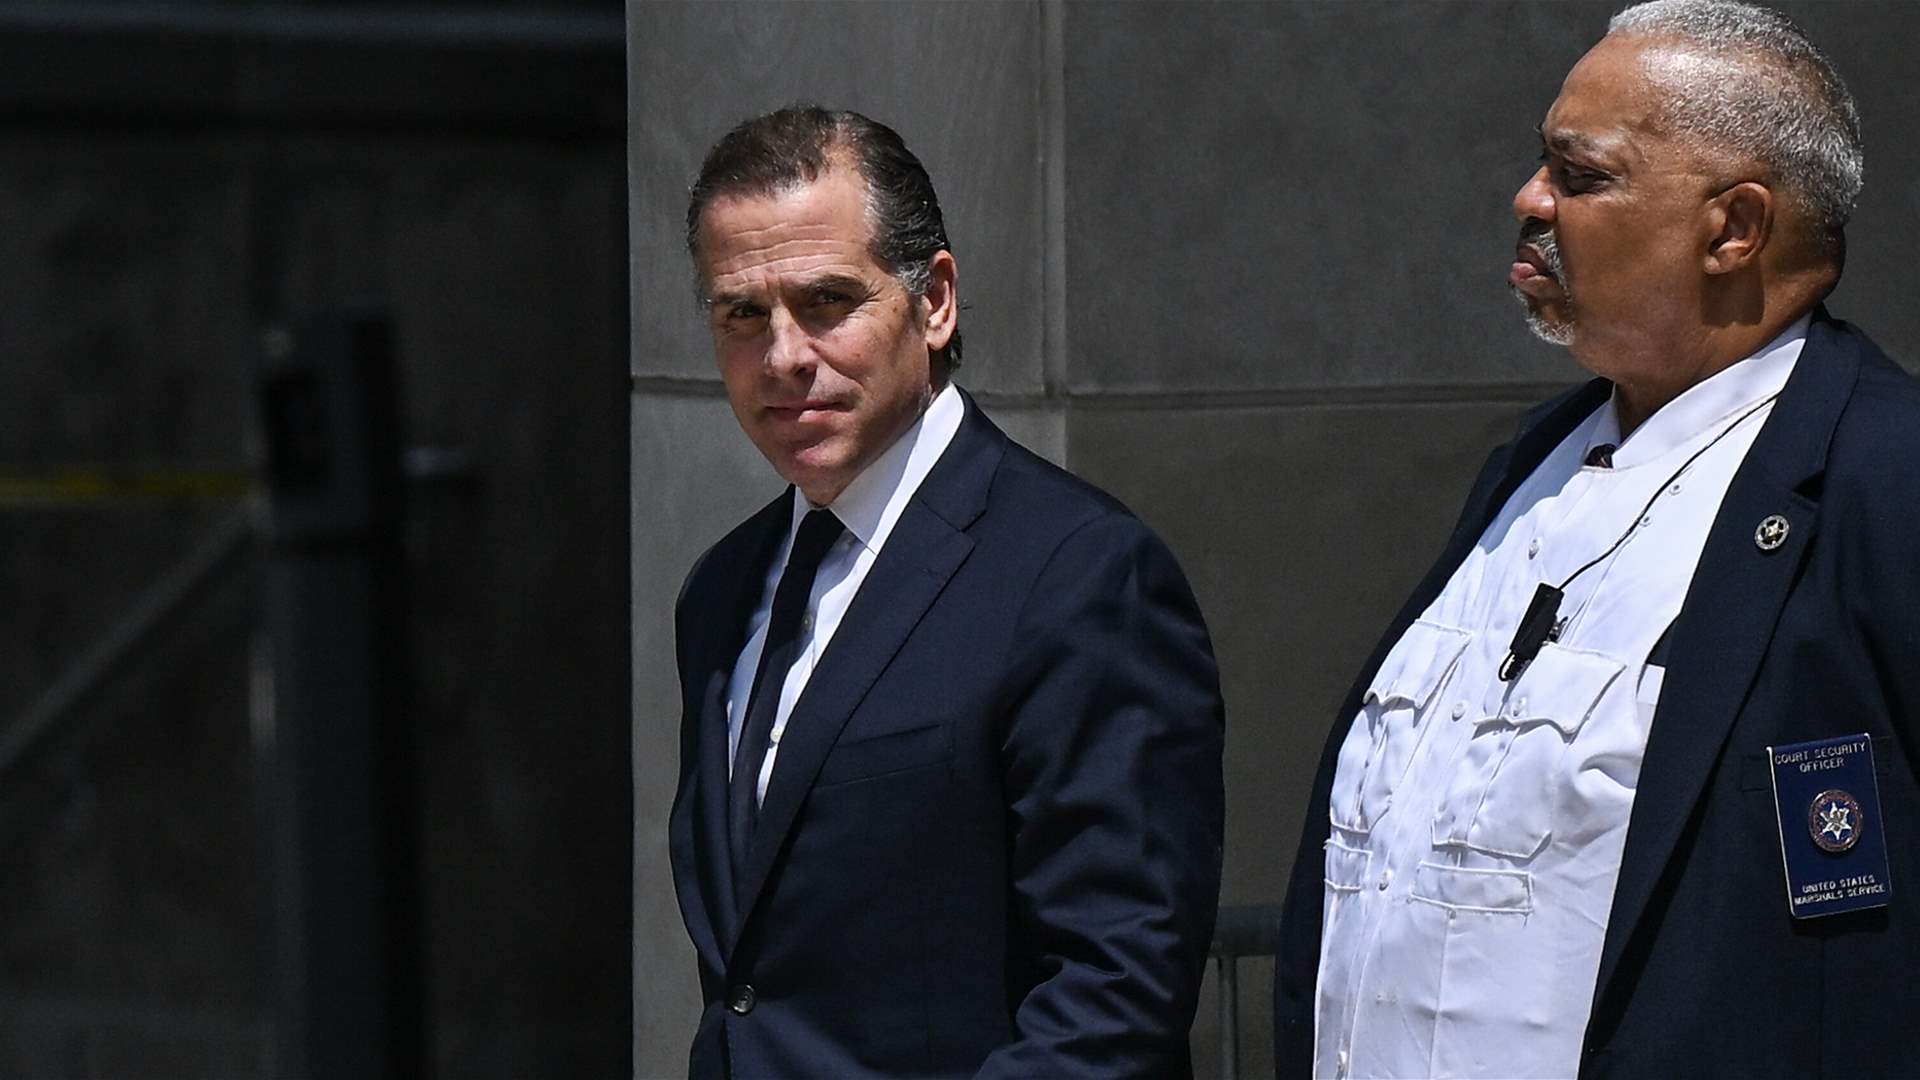 Hunter Biden Scheduled to Appear in Court for Illegal Firearm Possession Charges